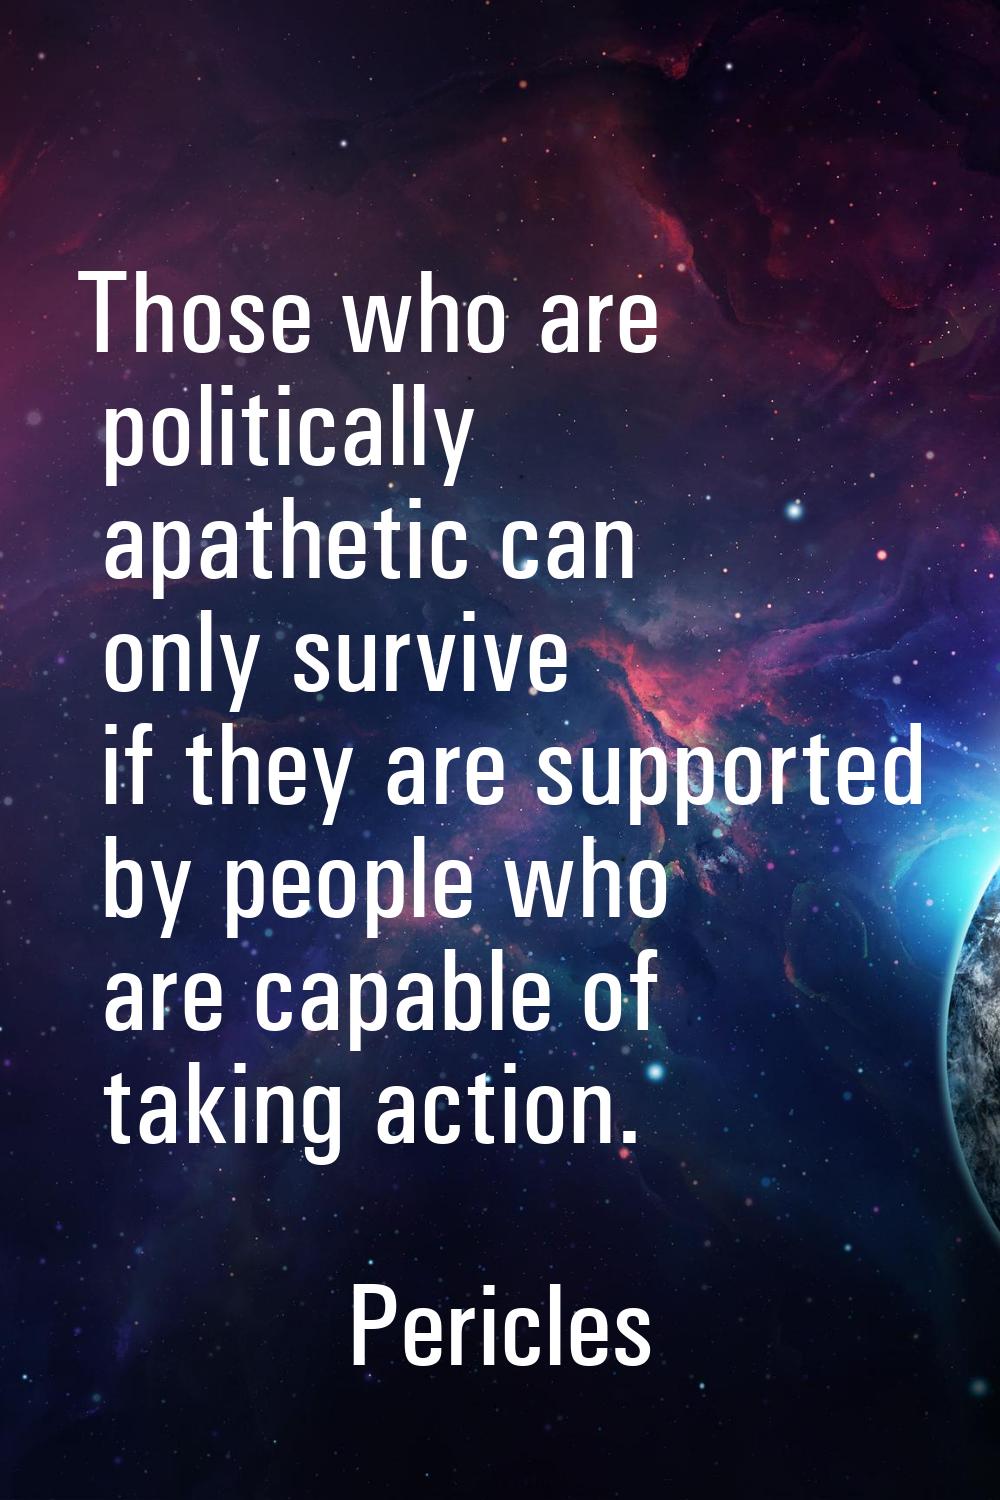 Those who are politically apathetic can only survive if they are supported by people who are capabl